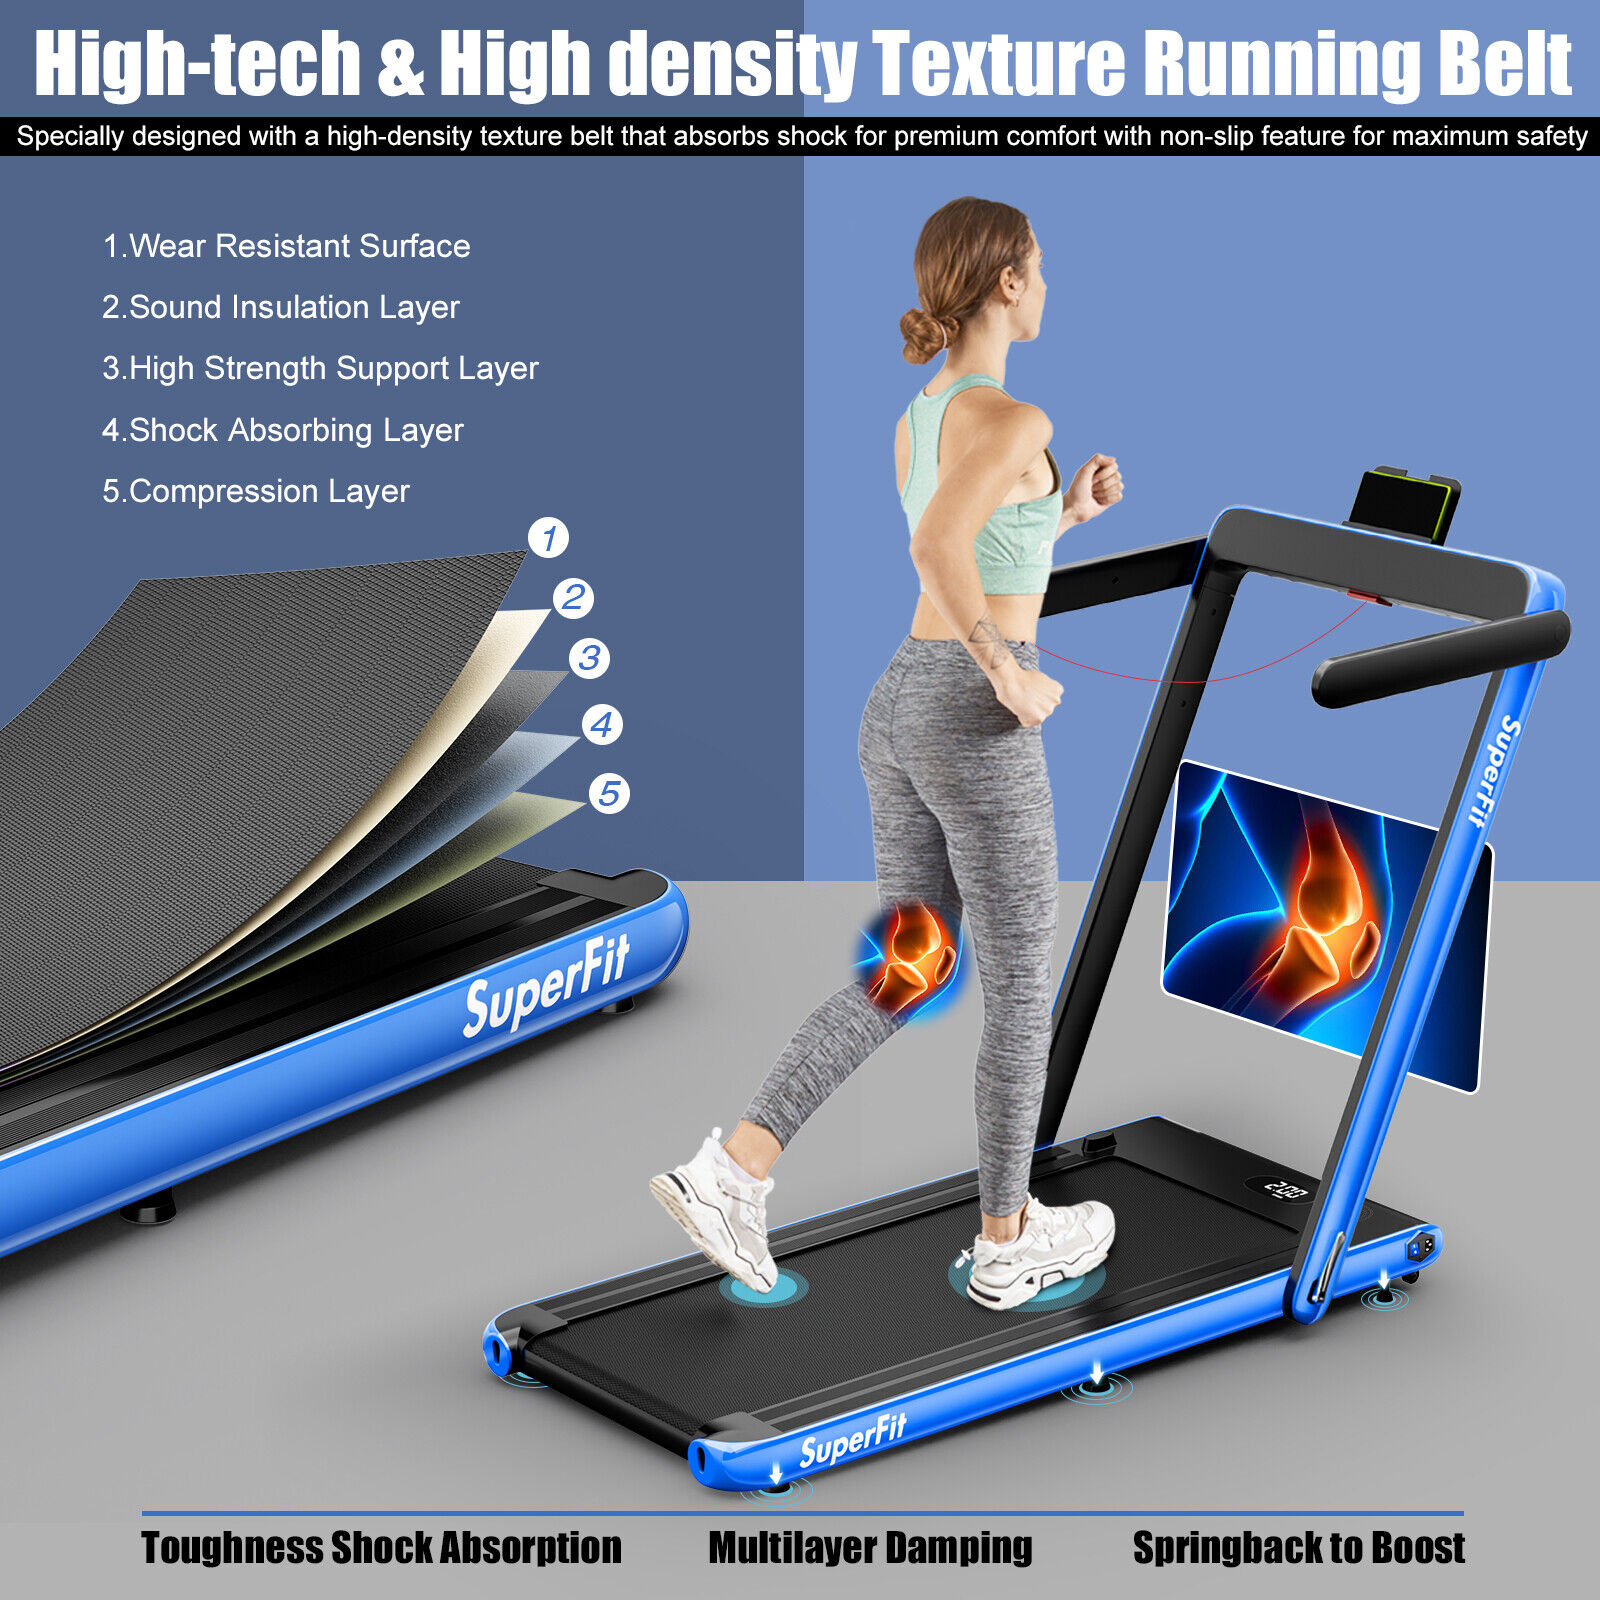 SuperFit Up To 7.5MPH 2.25HP 2 in 1 Single Display Screen Folding Treadmill W/ APP Control Speaker Remote Control Blue - image 5 of 10